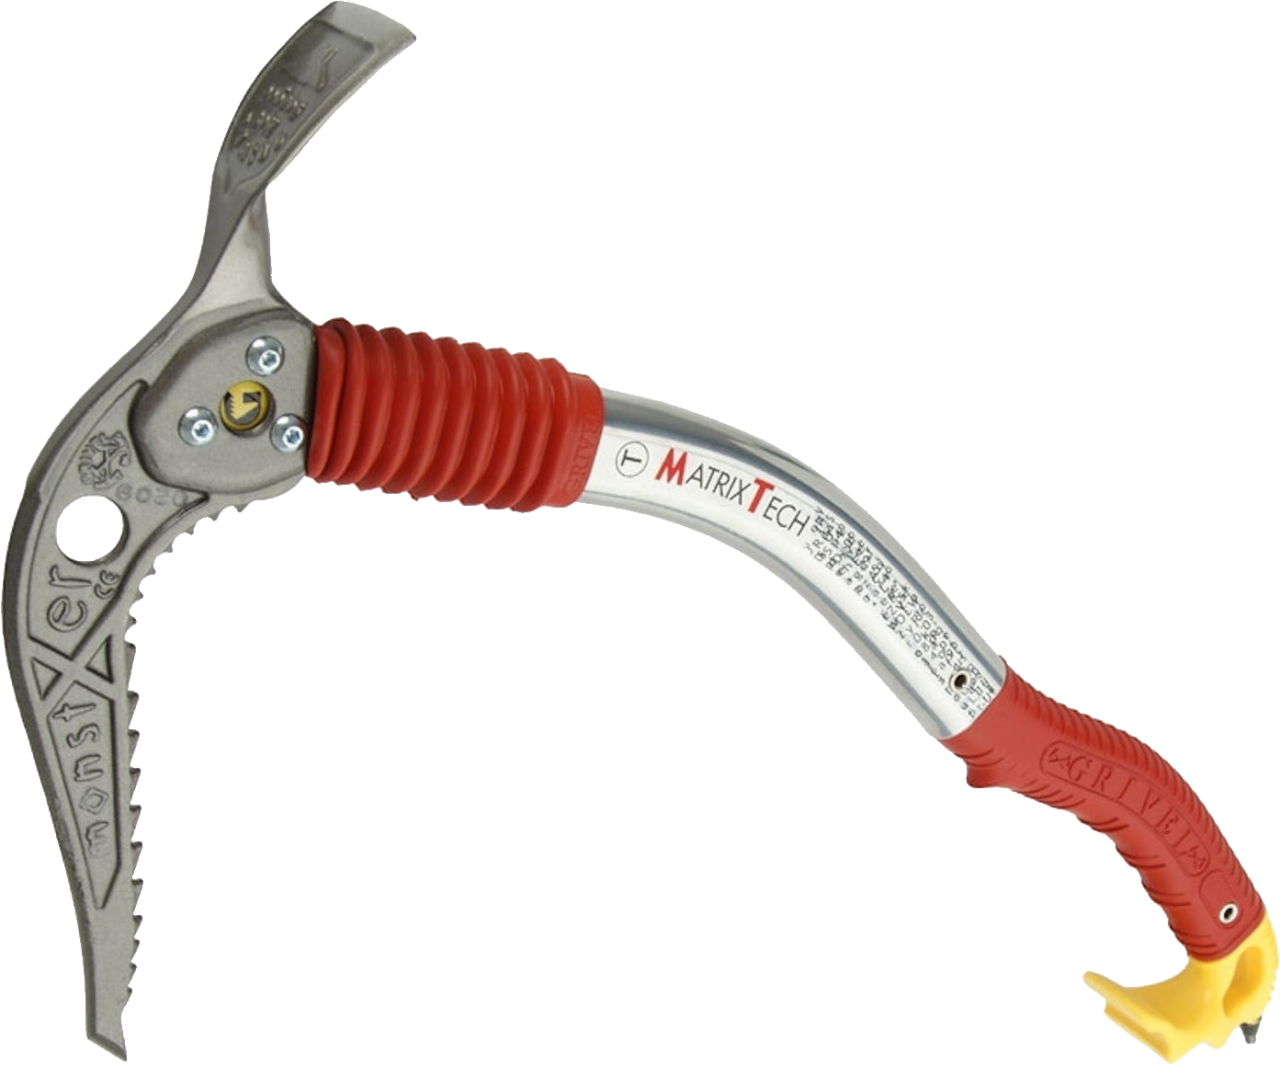 Glacier Ice Axe PNG Image High Quality PNG Image